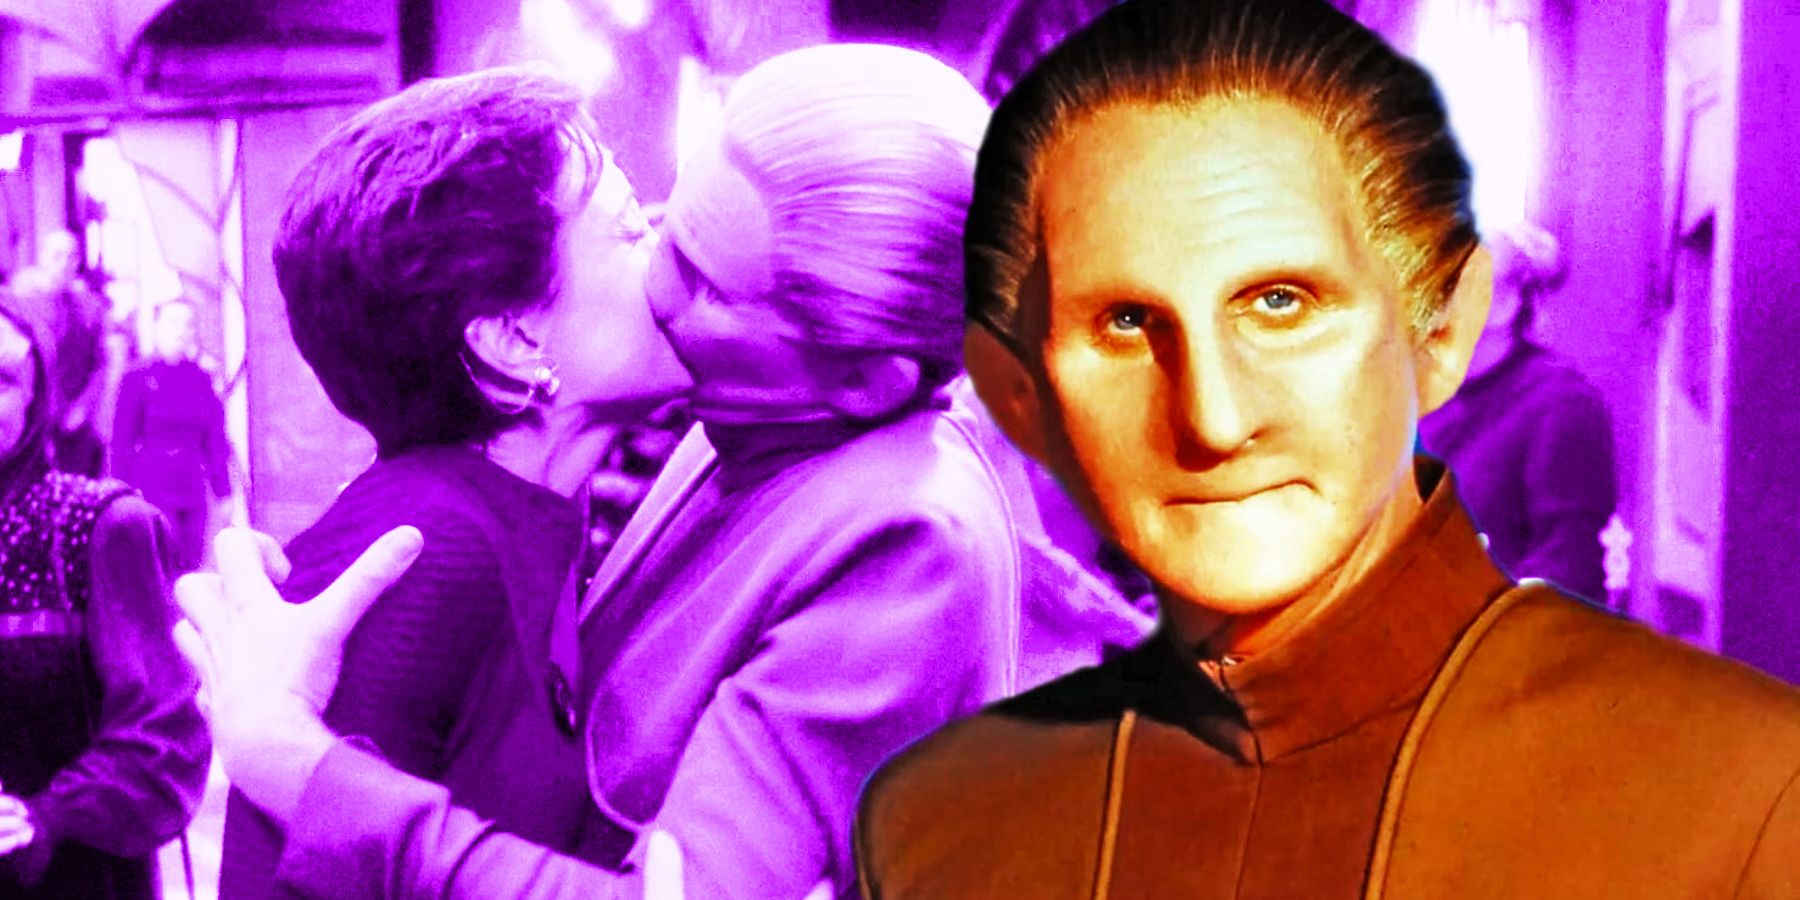 Kira and Odo kissing in DS9, and a promotional shot of Rene Auberjonois as Odo